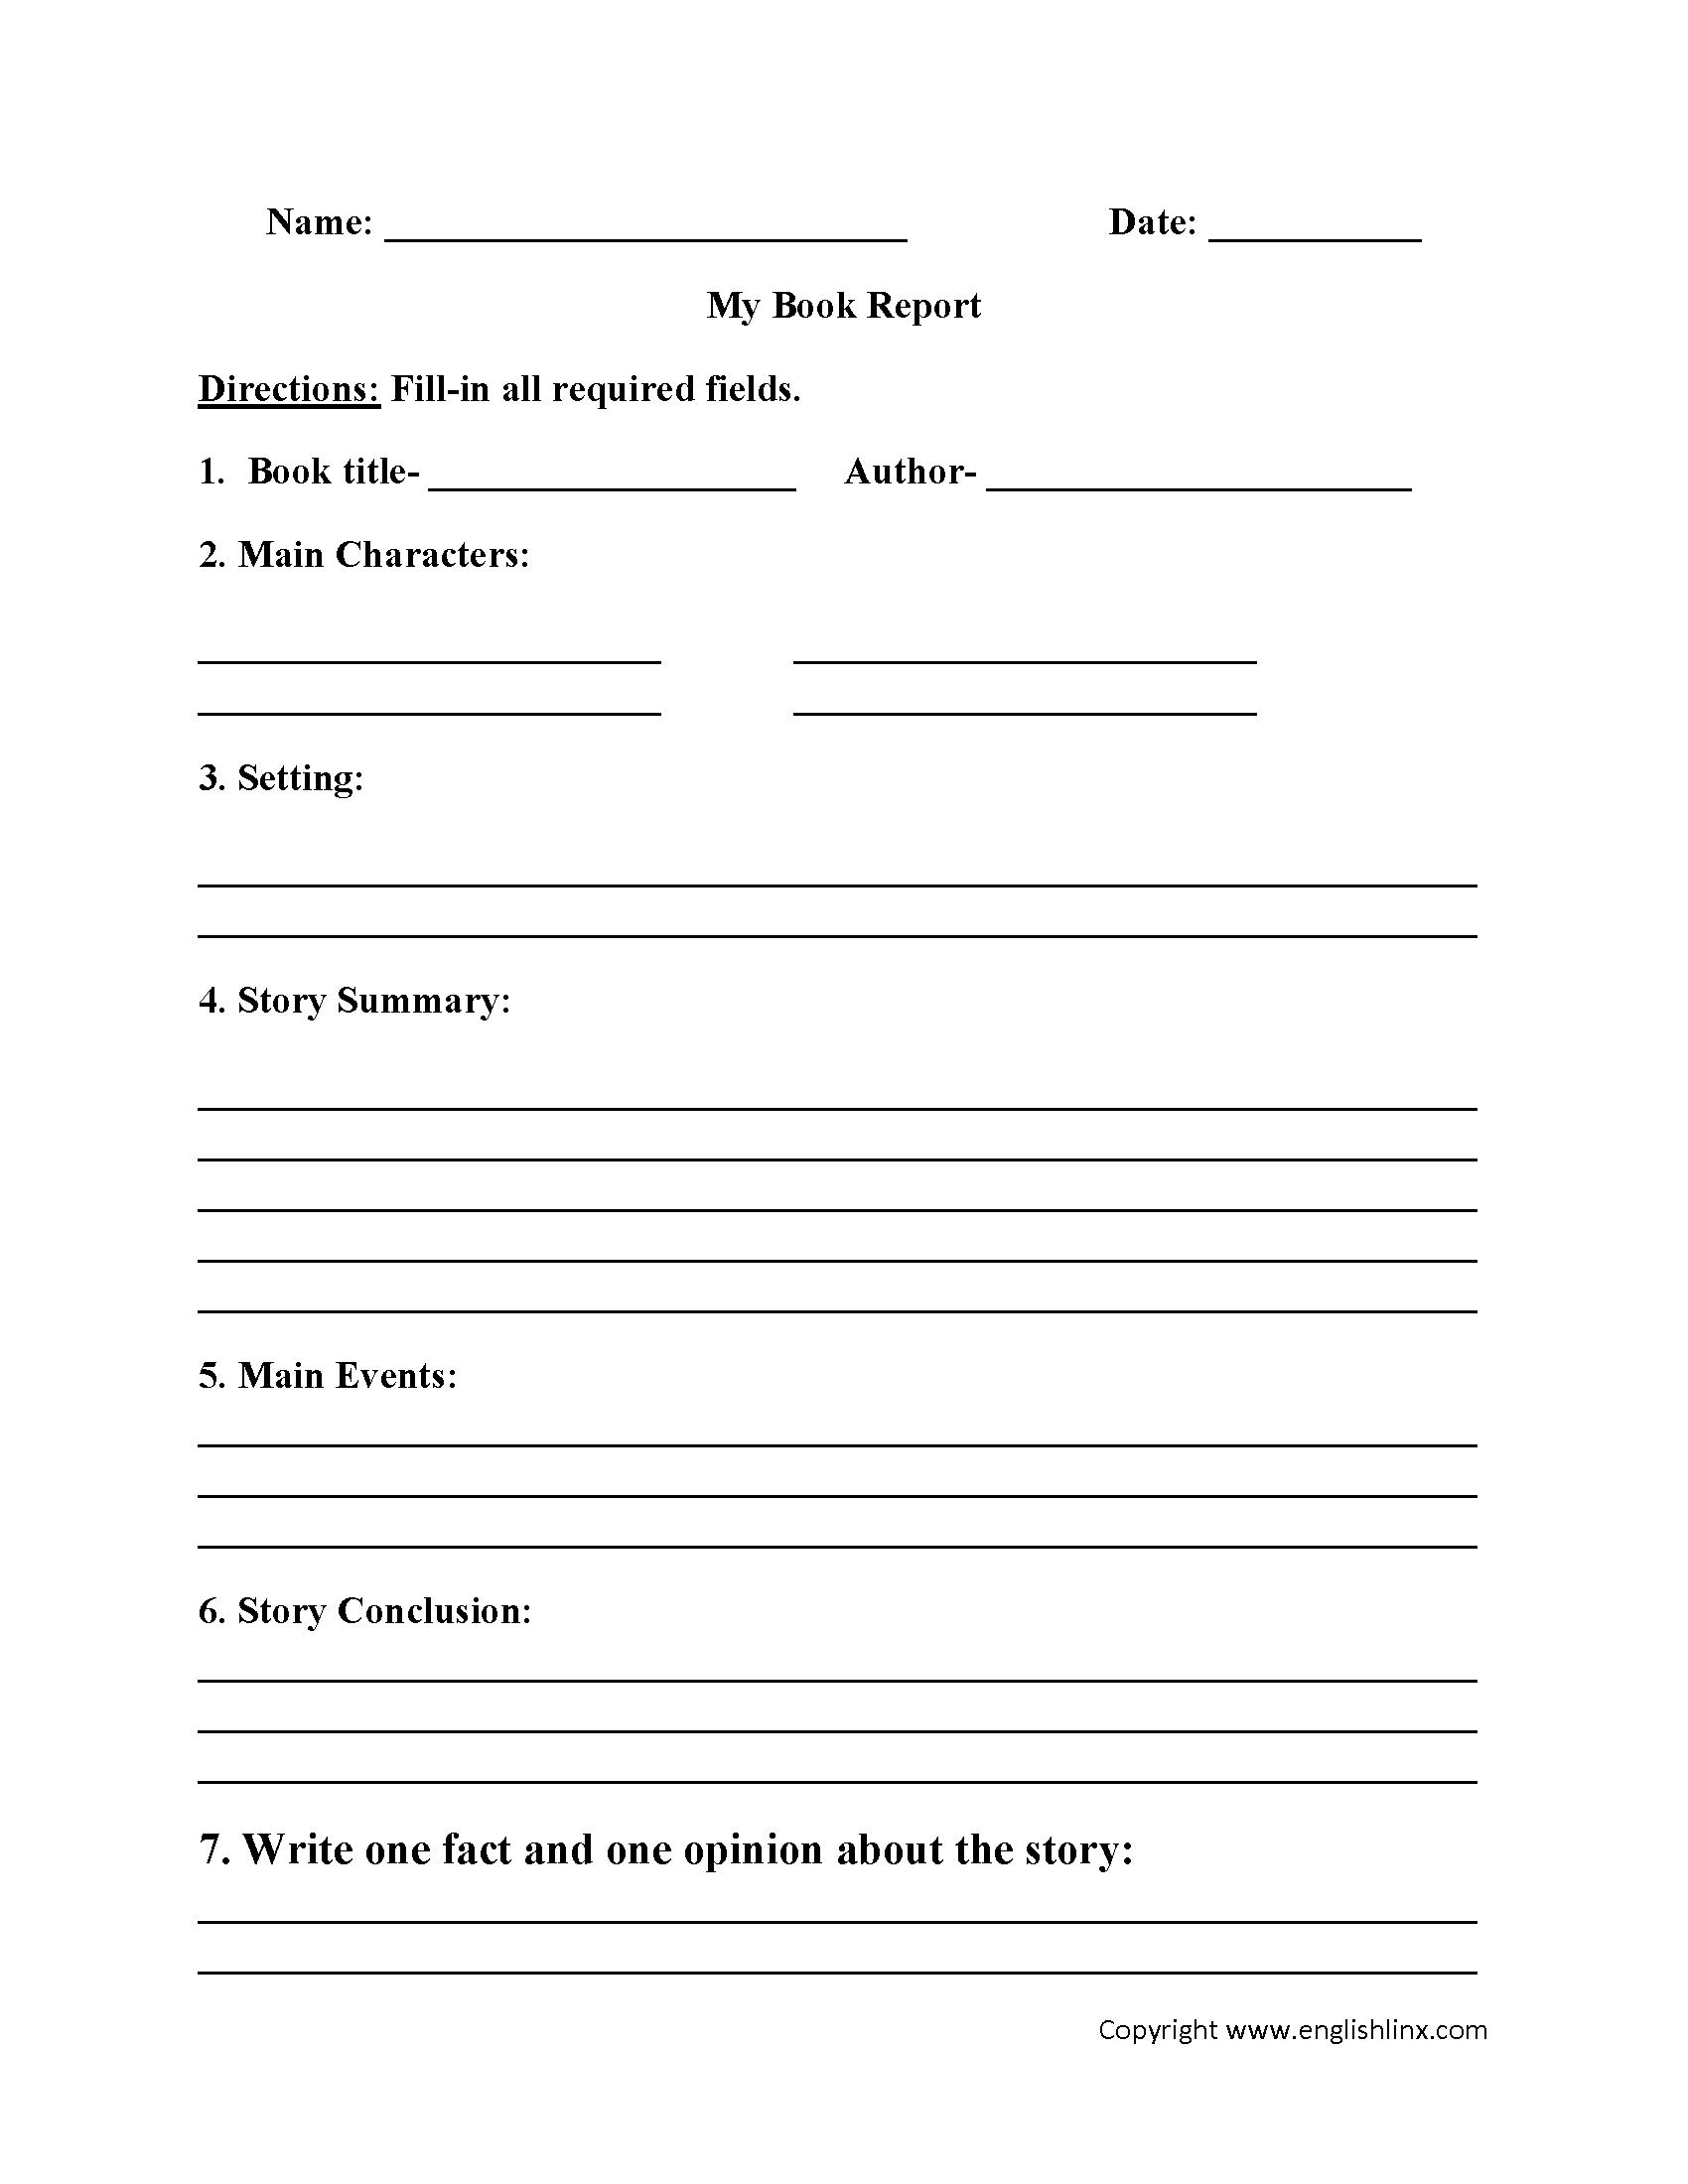 Englishlinx | Book Report Worksheets Throughout Story Report Template